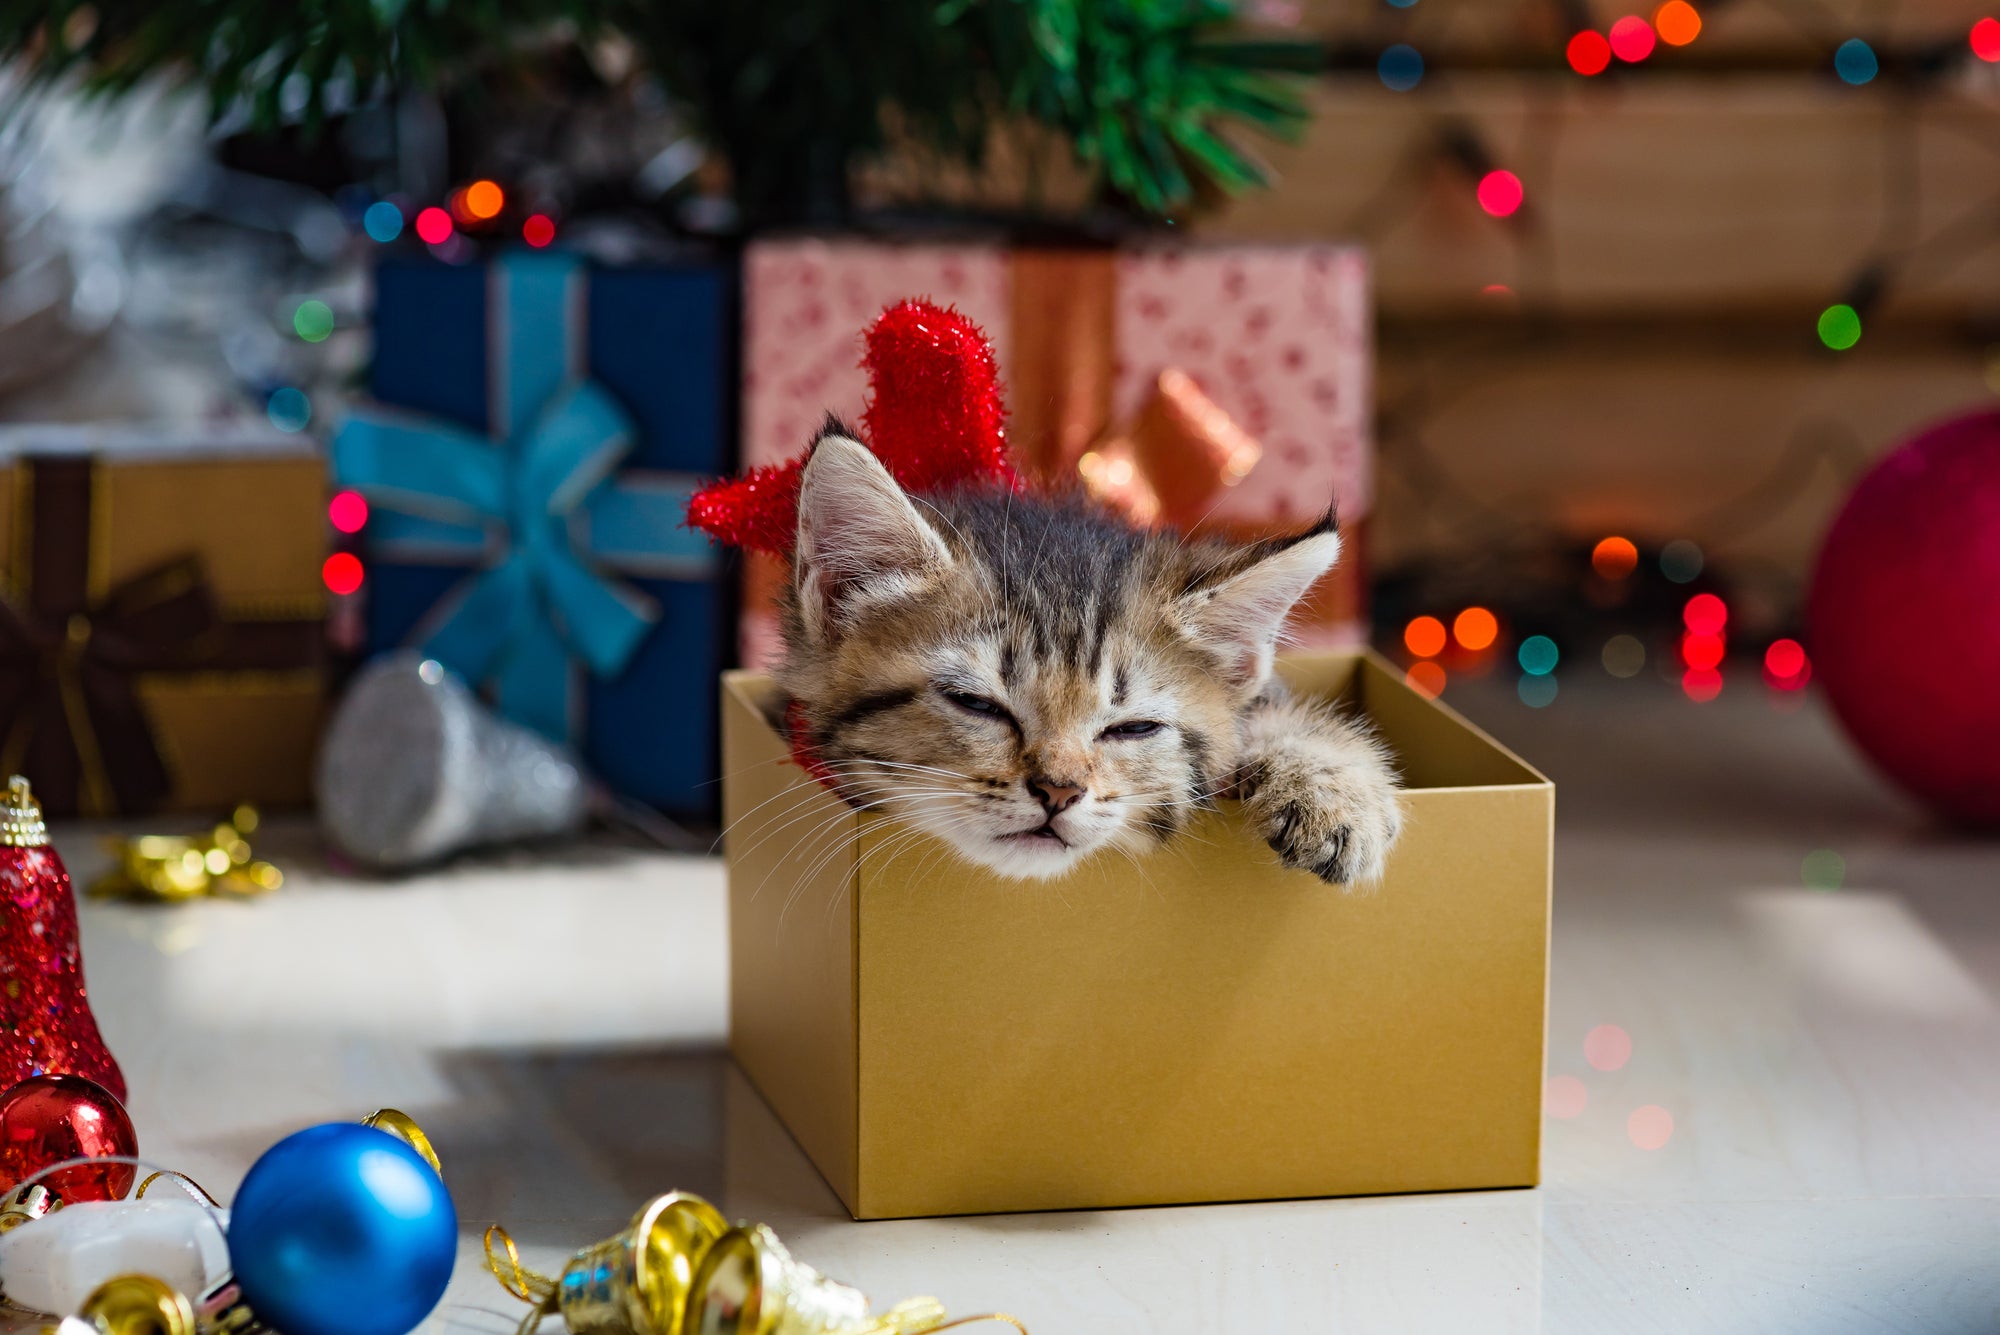 Should You Give a Pet as a Gift for the Holidays?